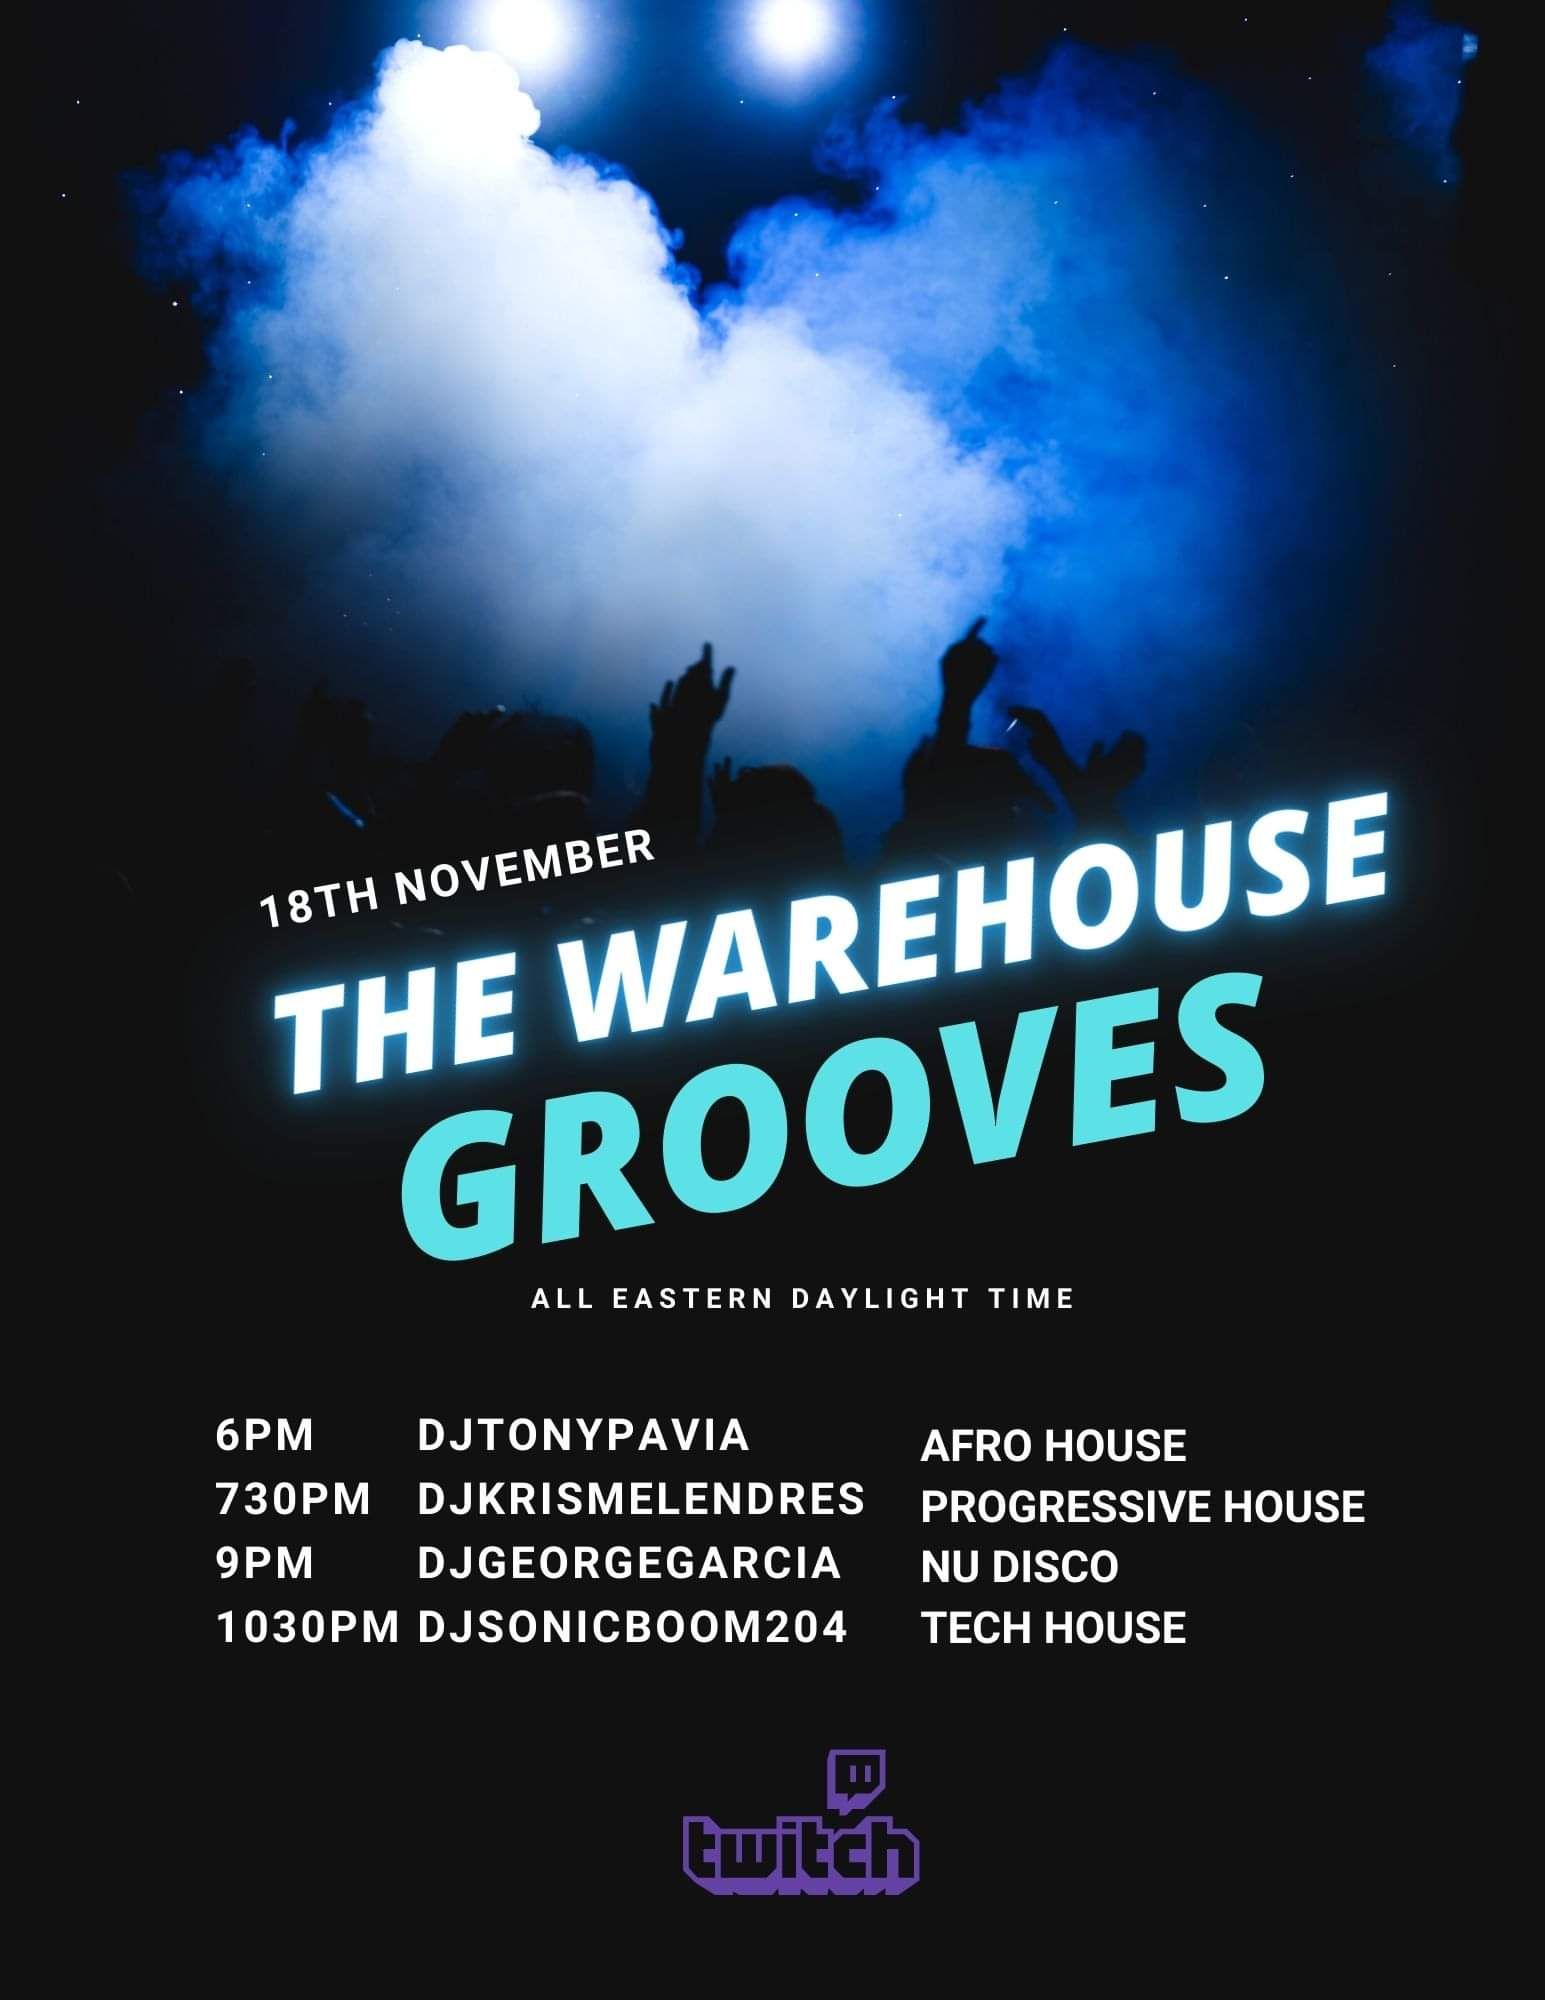 The Warehouse Grooves